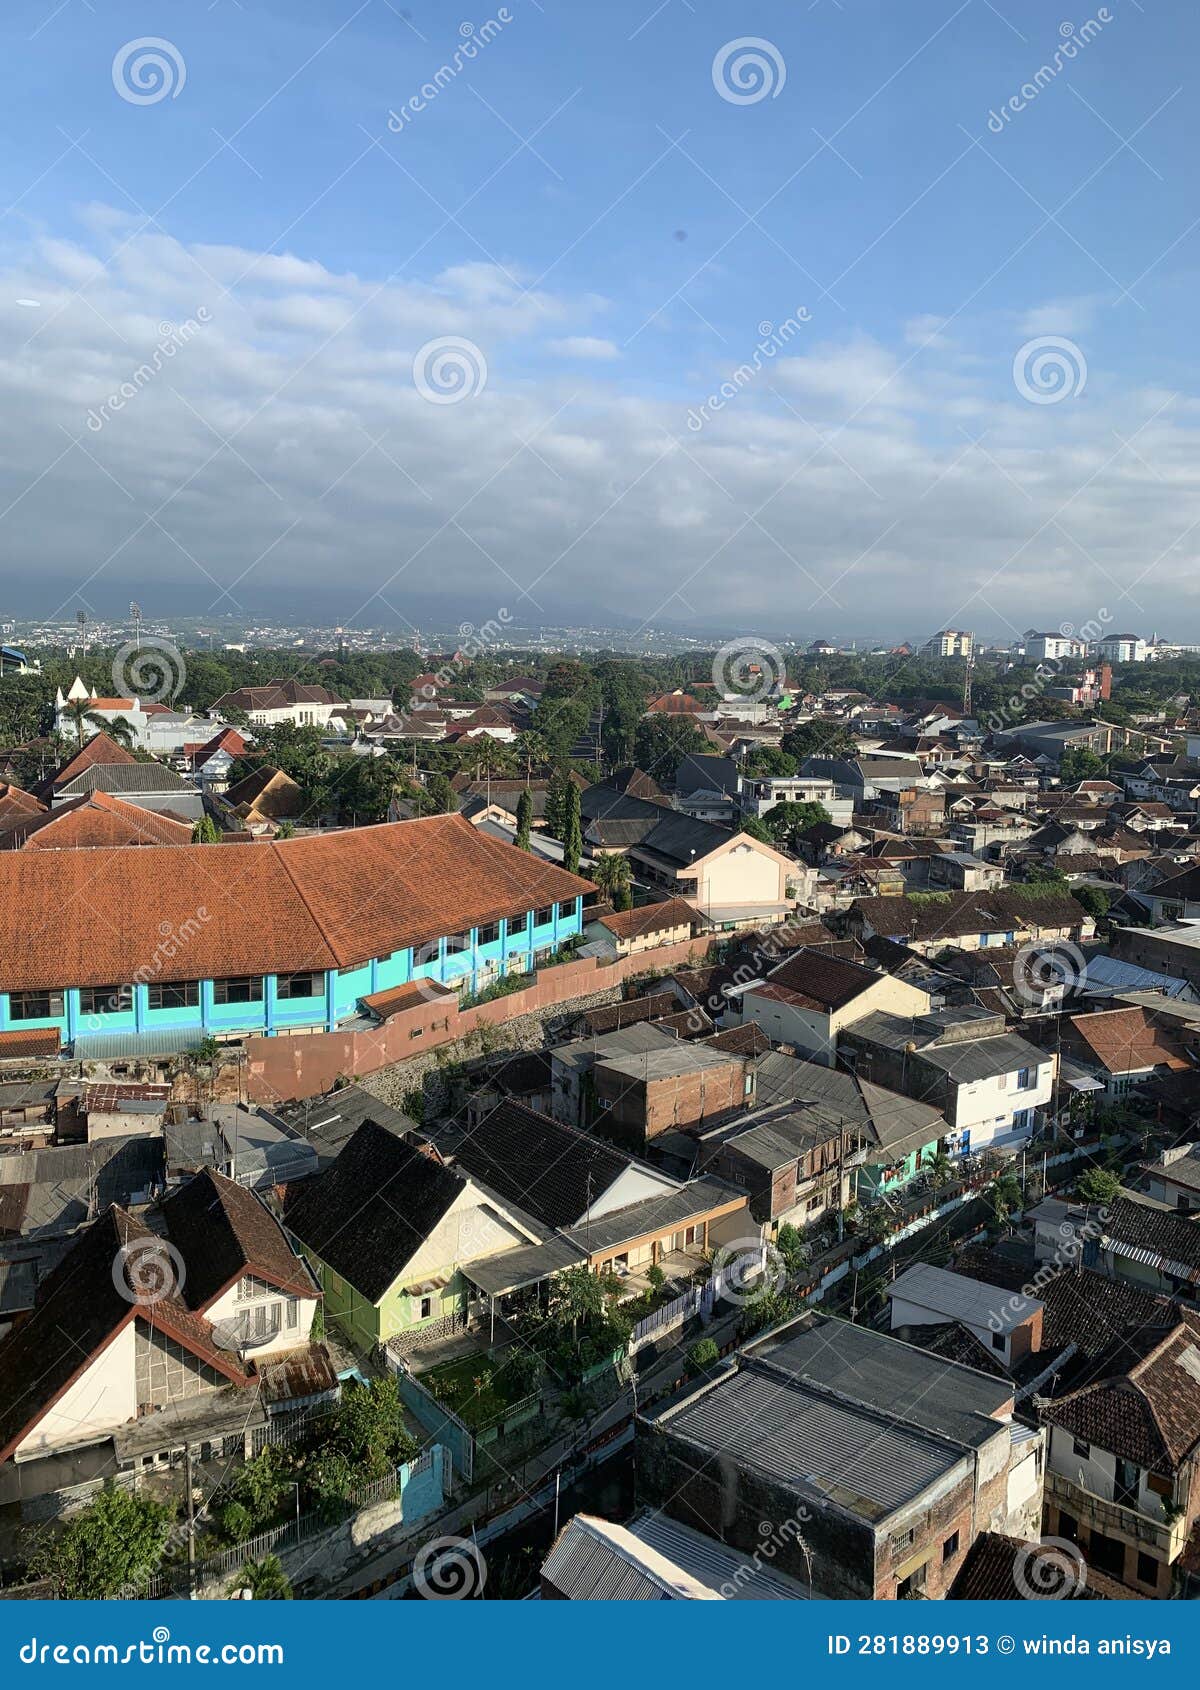 view roftop hotel in the malang city